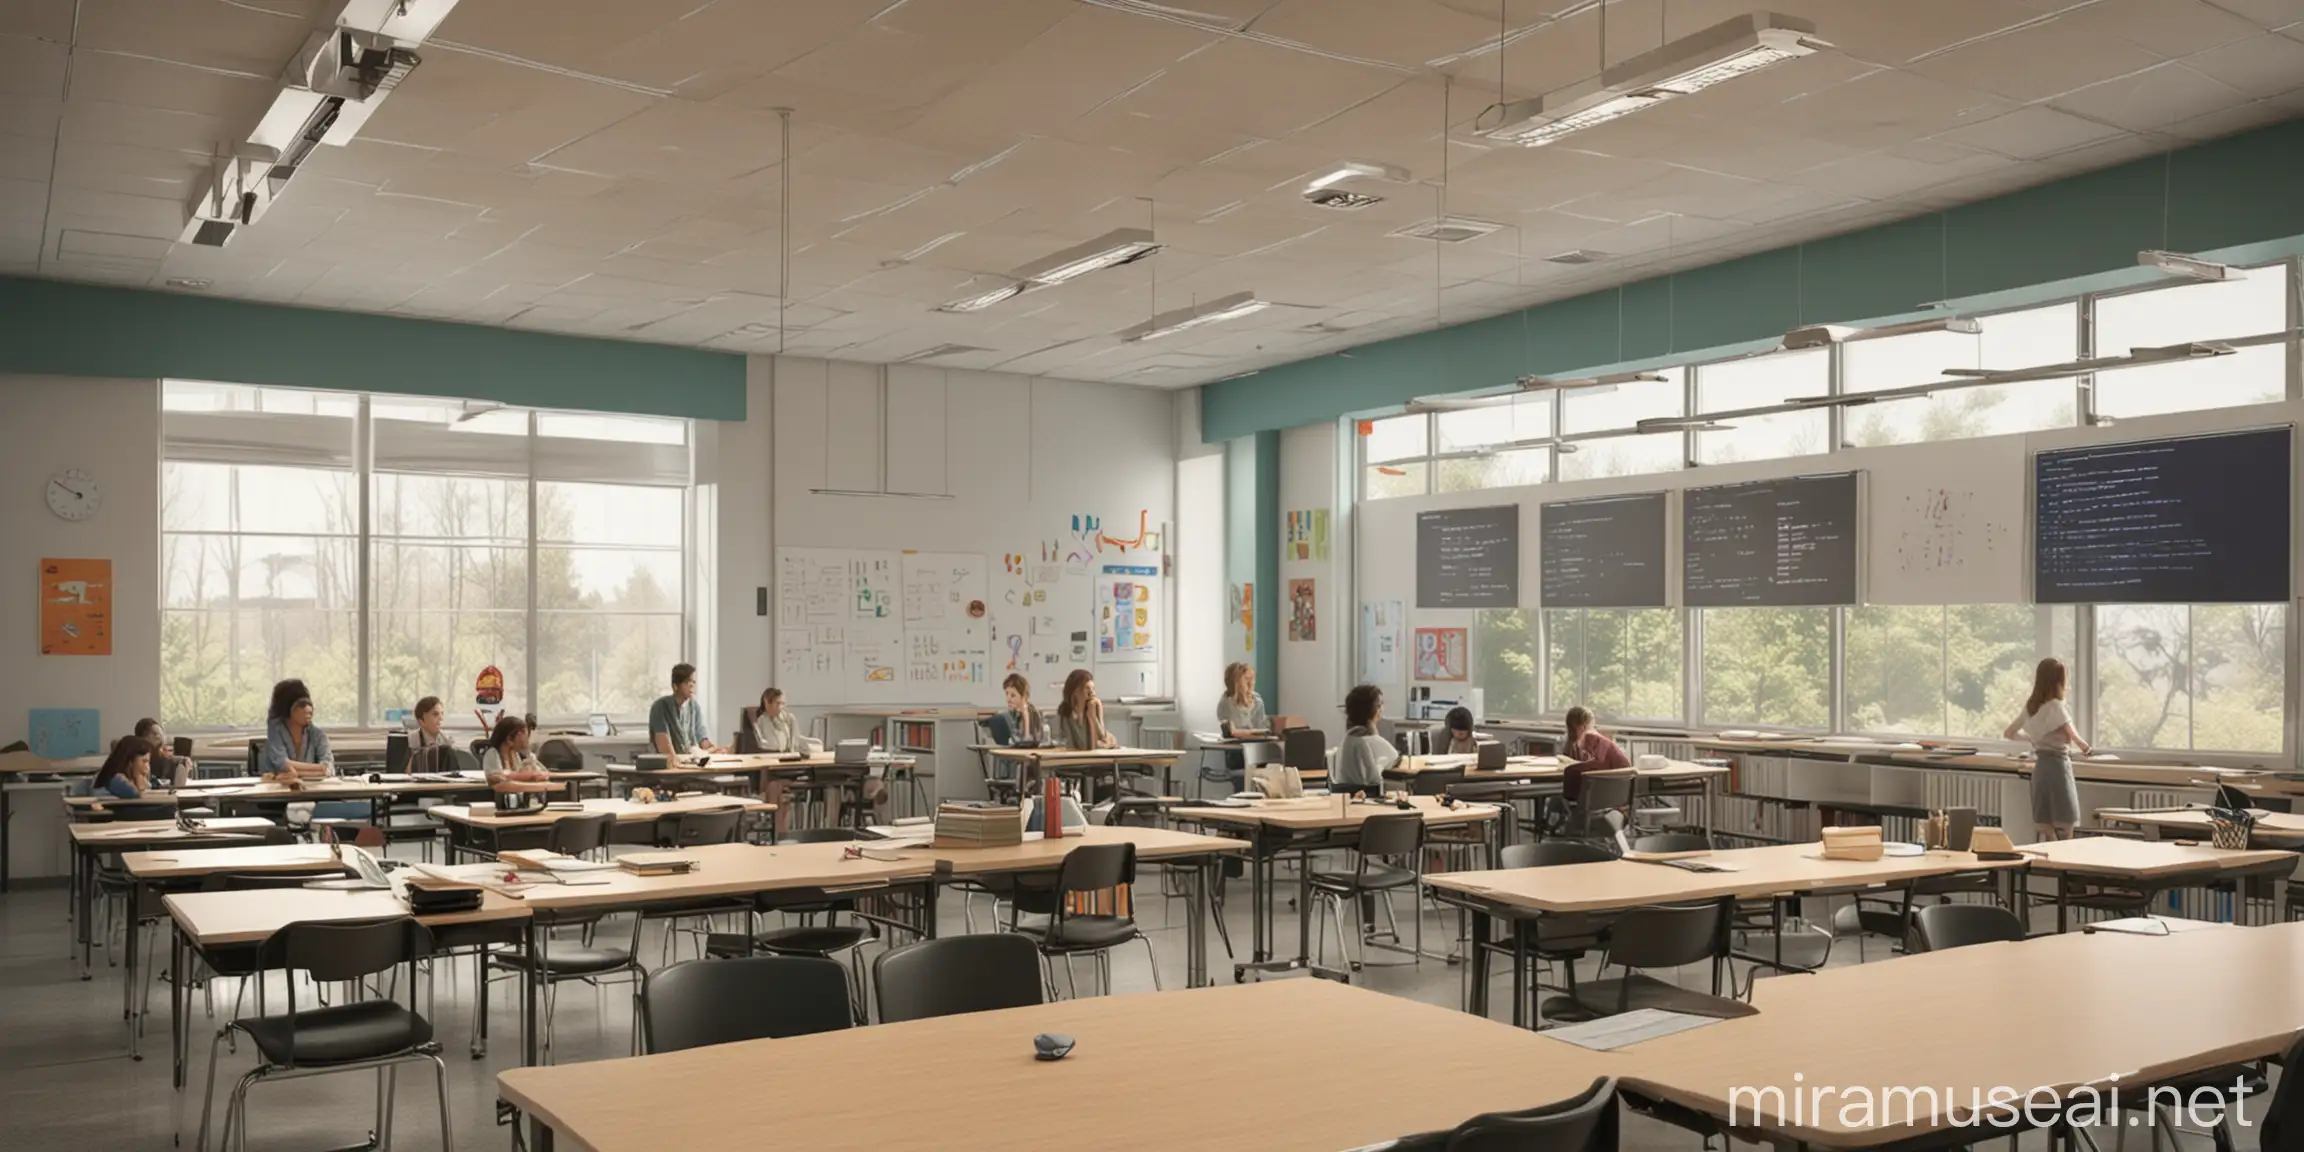 A photorealistic image of a bright spacious classroom with large windows. In the classroom, there are rows of modern desks with adjustable height, some with built-in interactive touch panels. A sliding board hangs on the wall, and next to it is a large plasma screen. Textbooks, notebooks, and colored pencils are lying on the tables. Students are sitting in the classroom, some working on interactive panels, while others are listening to the teacher.